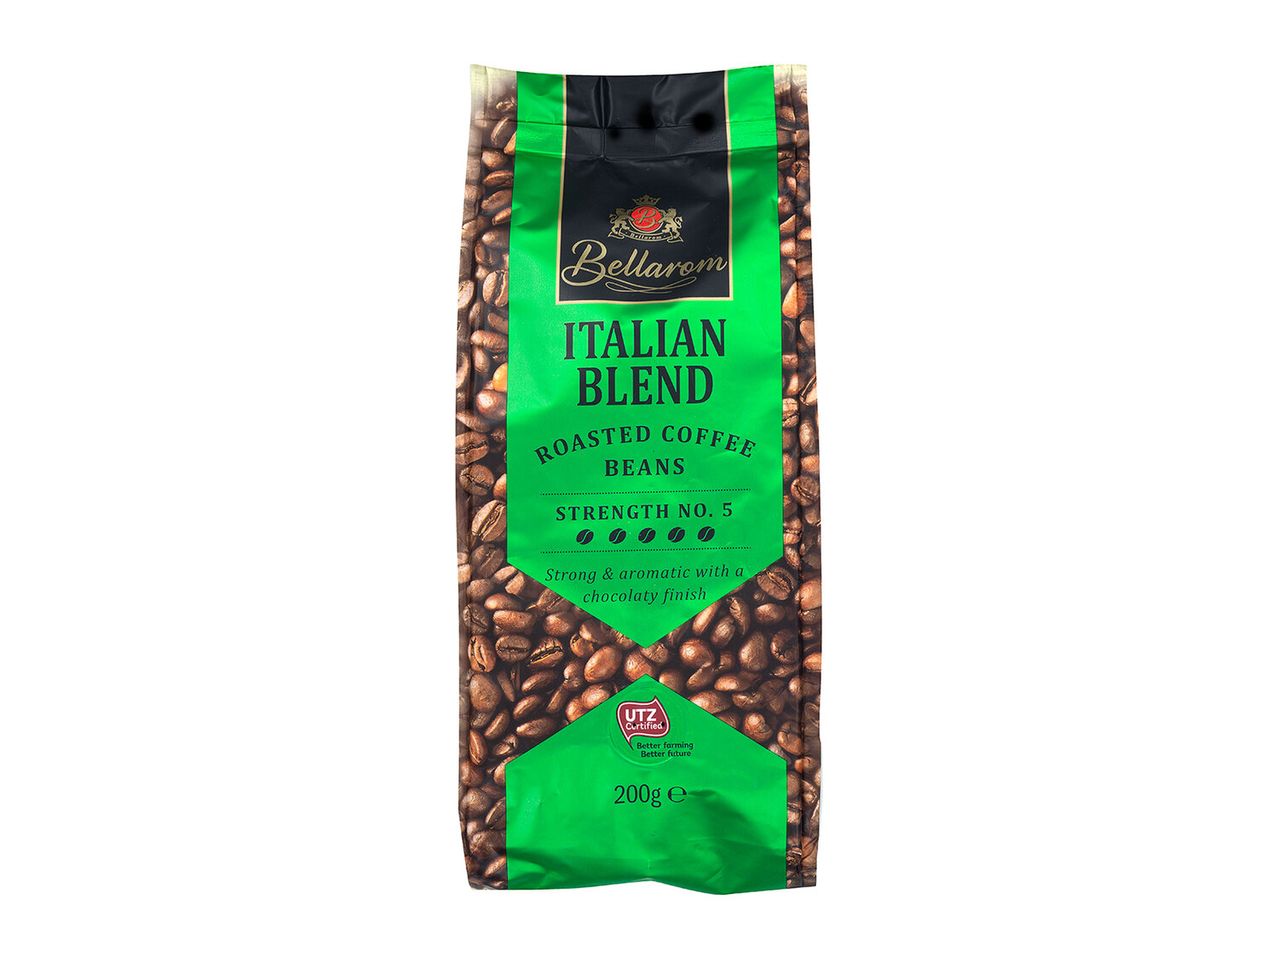 Go to full screen view: Bellarom Roasted Coffee Beans - Image 2